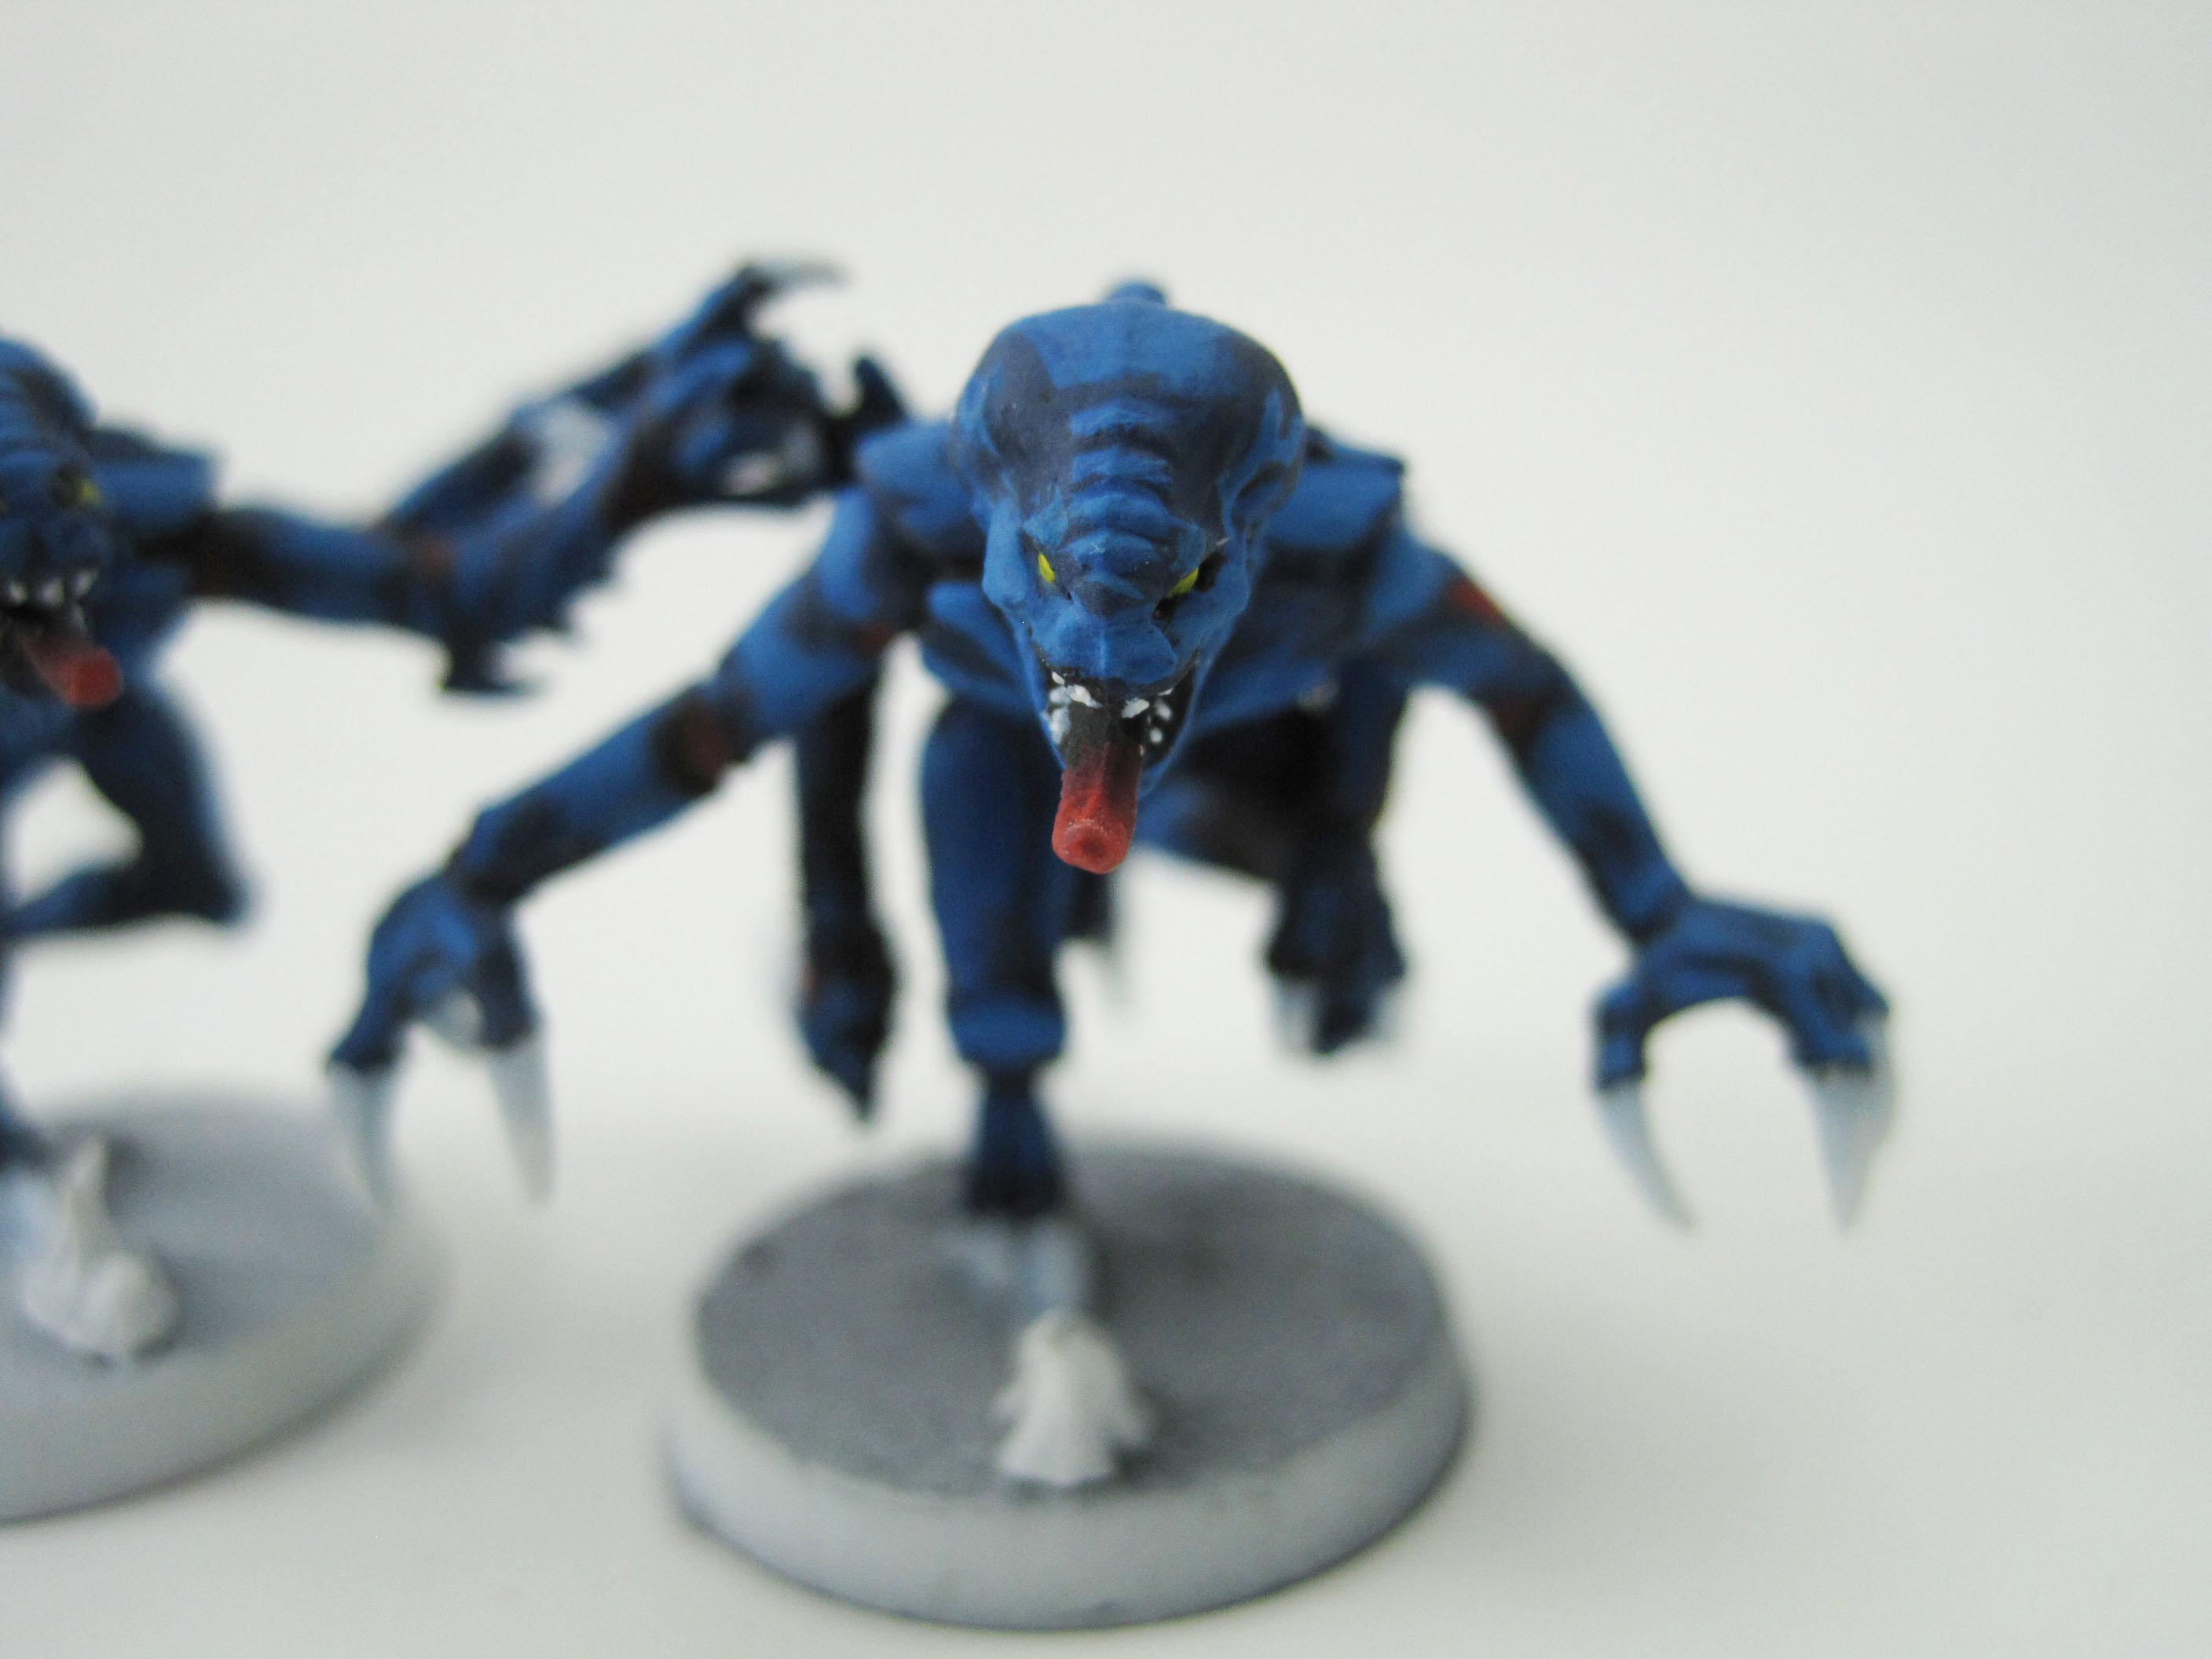 Blue, Genestealer, Kyogre, Red Carapace, Red Spots, Spot, Tyranids, White Claws